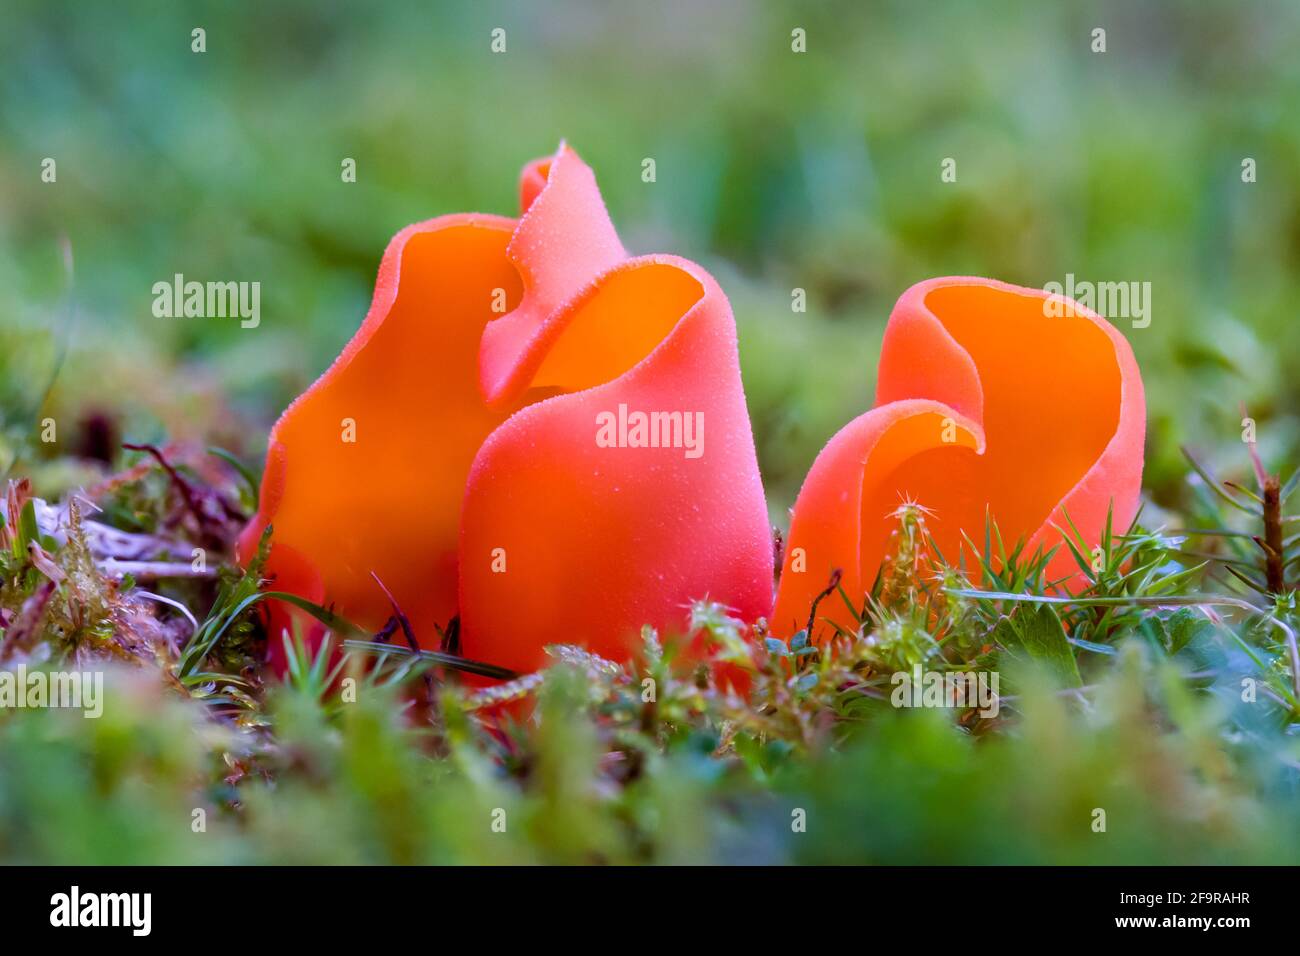 Salmon Salad or Apricot Jelly Guepinia helvelloides mushroom growing on grass in the Highlands of Scotland Stock Photo